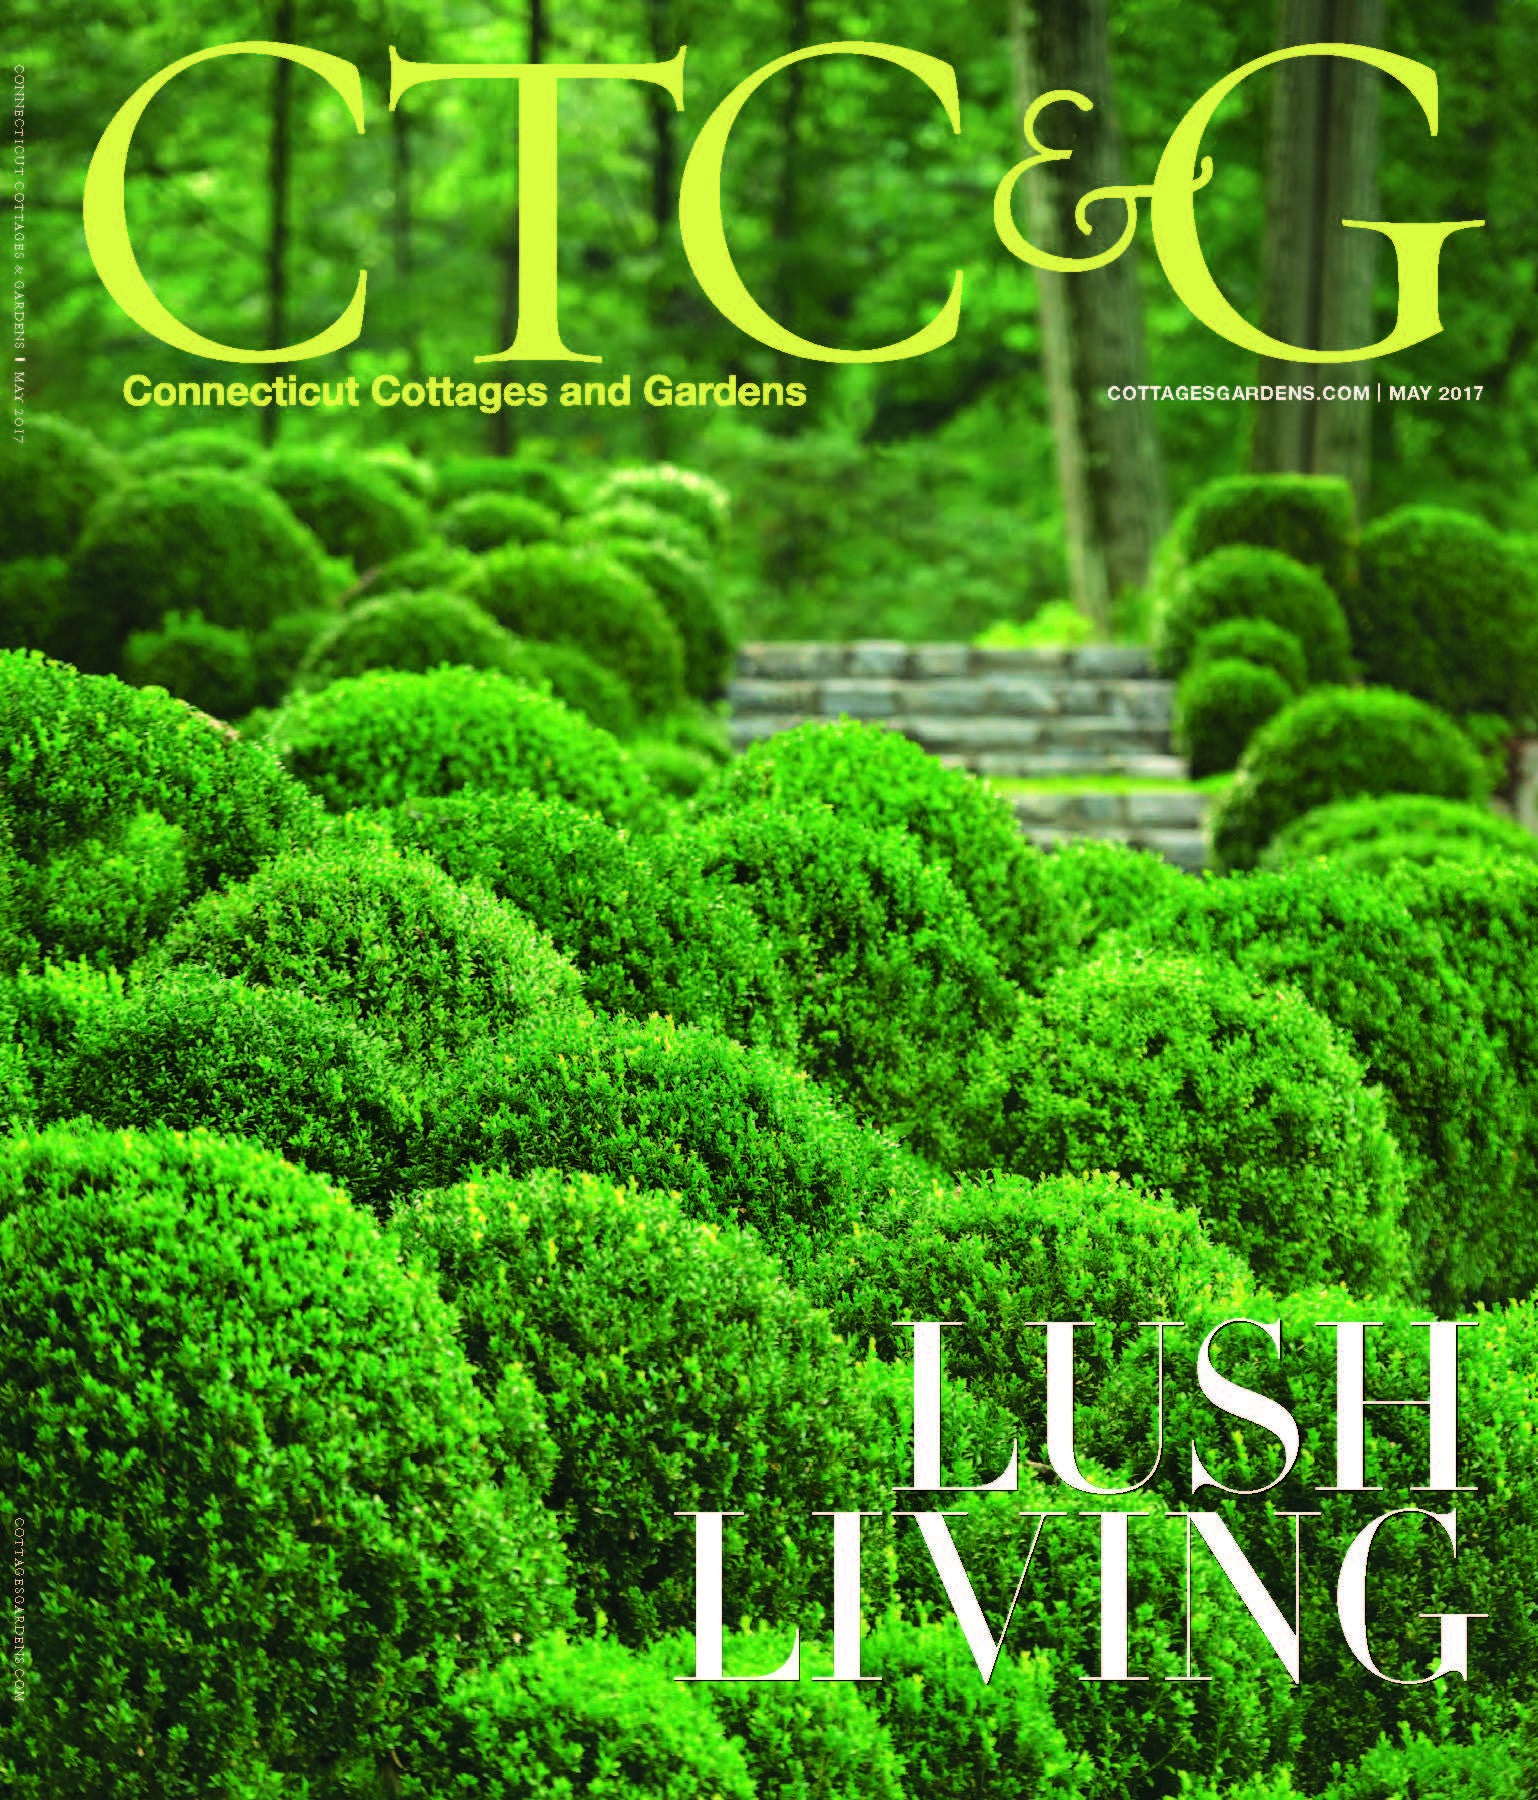 Featured Connecticut Cottages And Gardens Asha By Adm